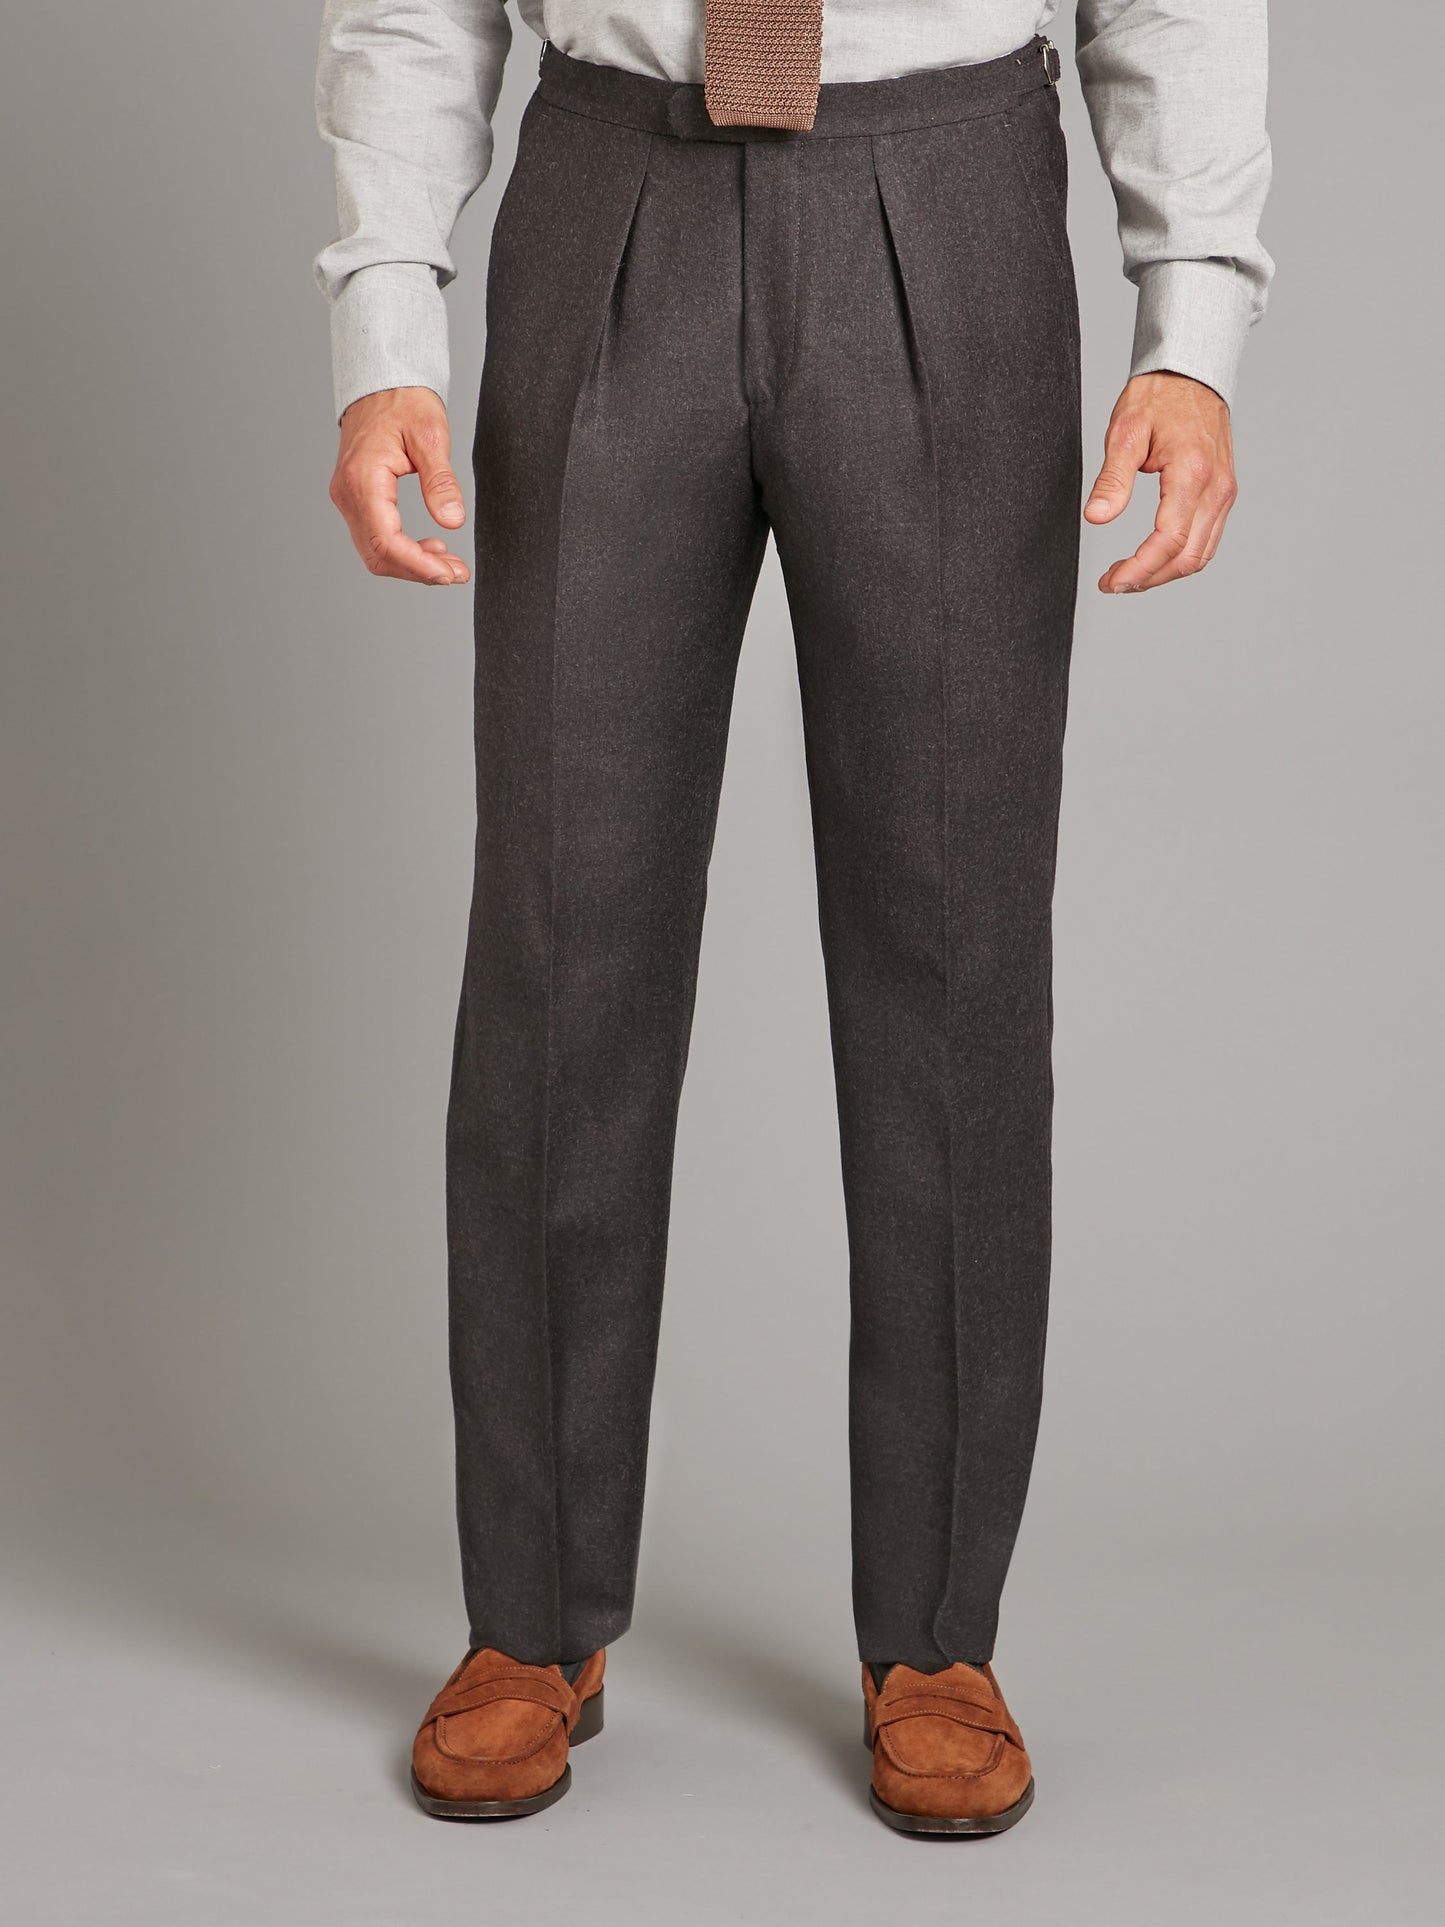 pleated trouser grey flannel 1